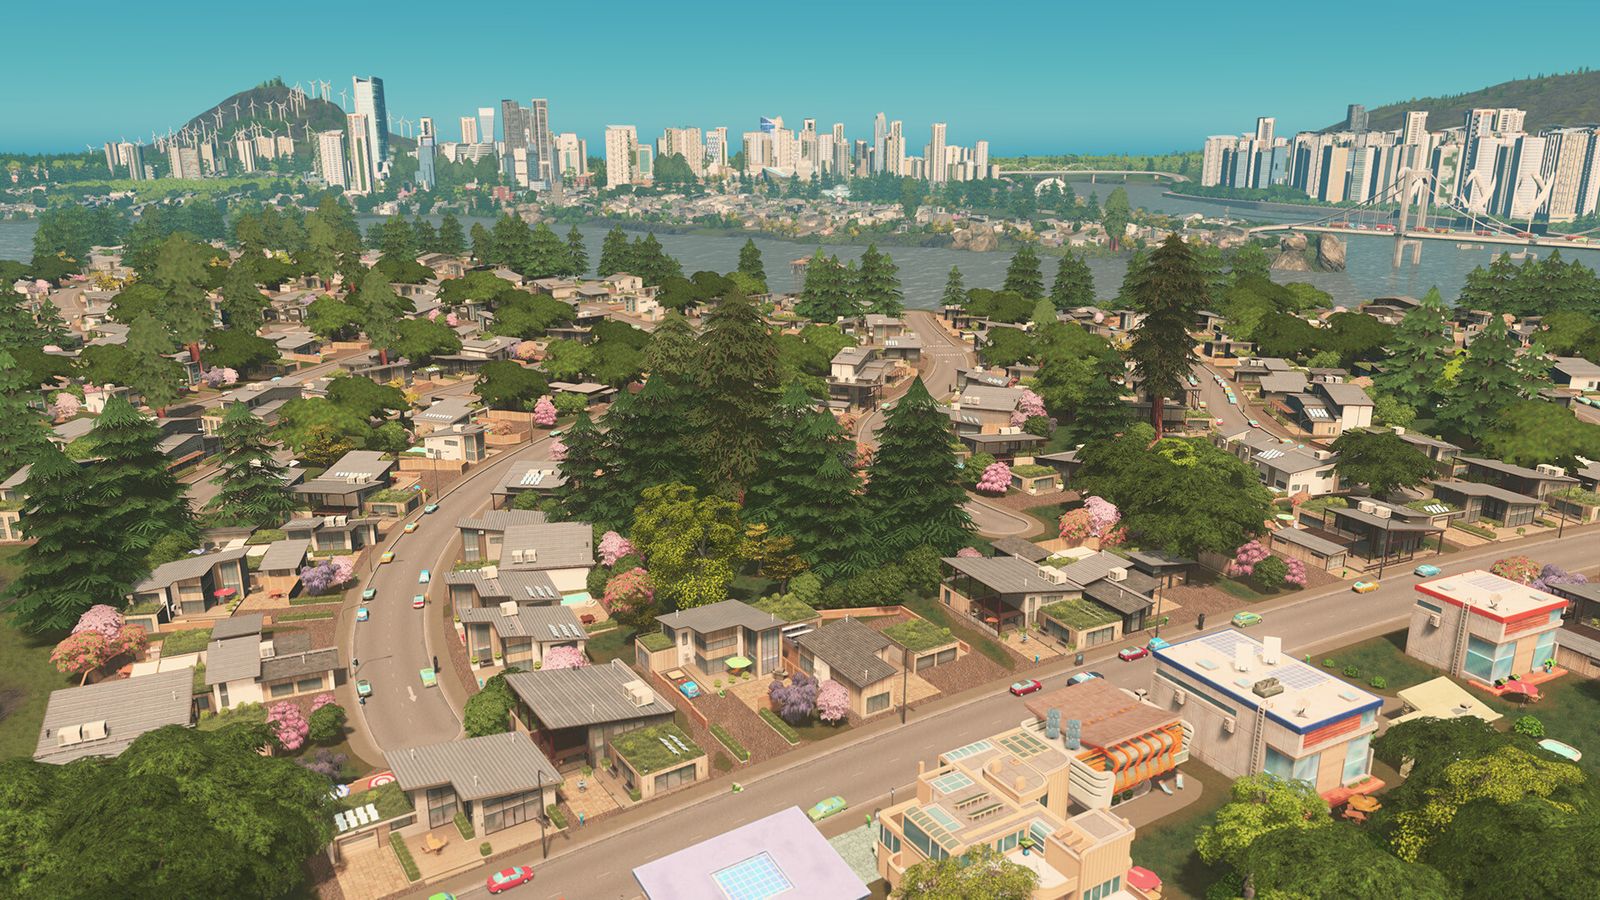 Cities: Skylines in-game image of a small town landscape with a high-rise city in the background across a river.